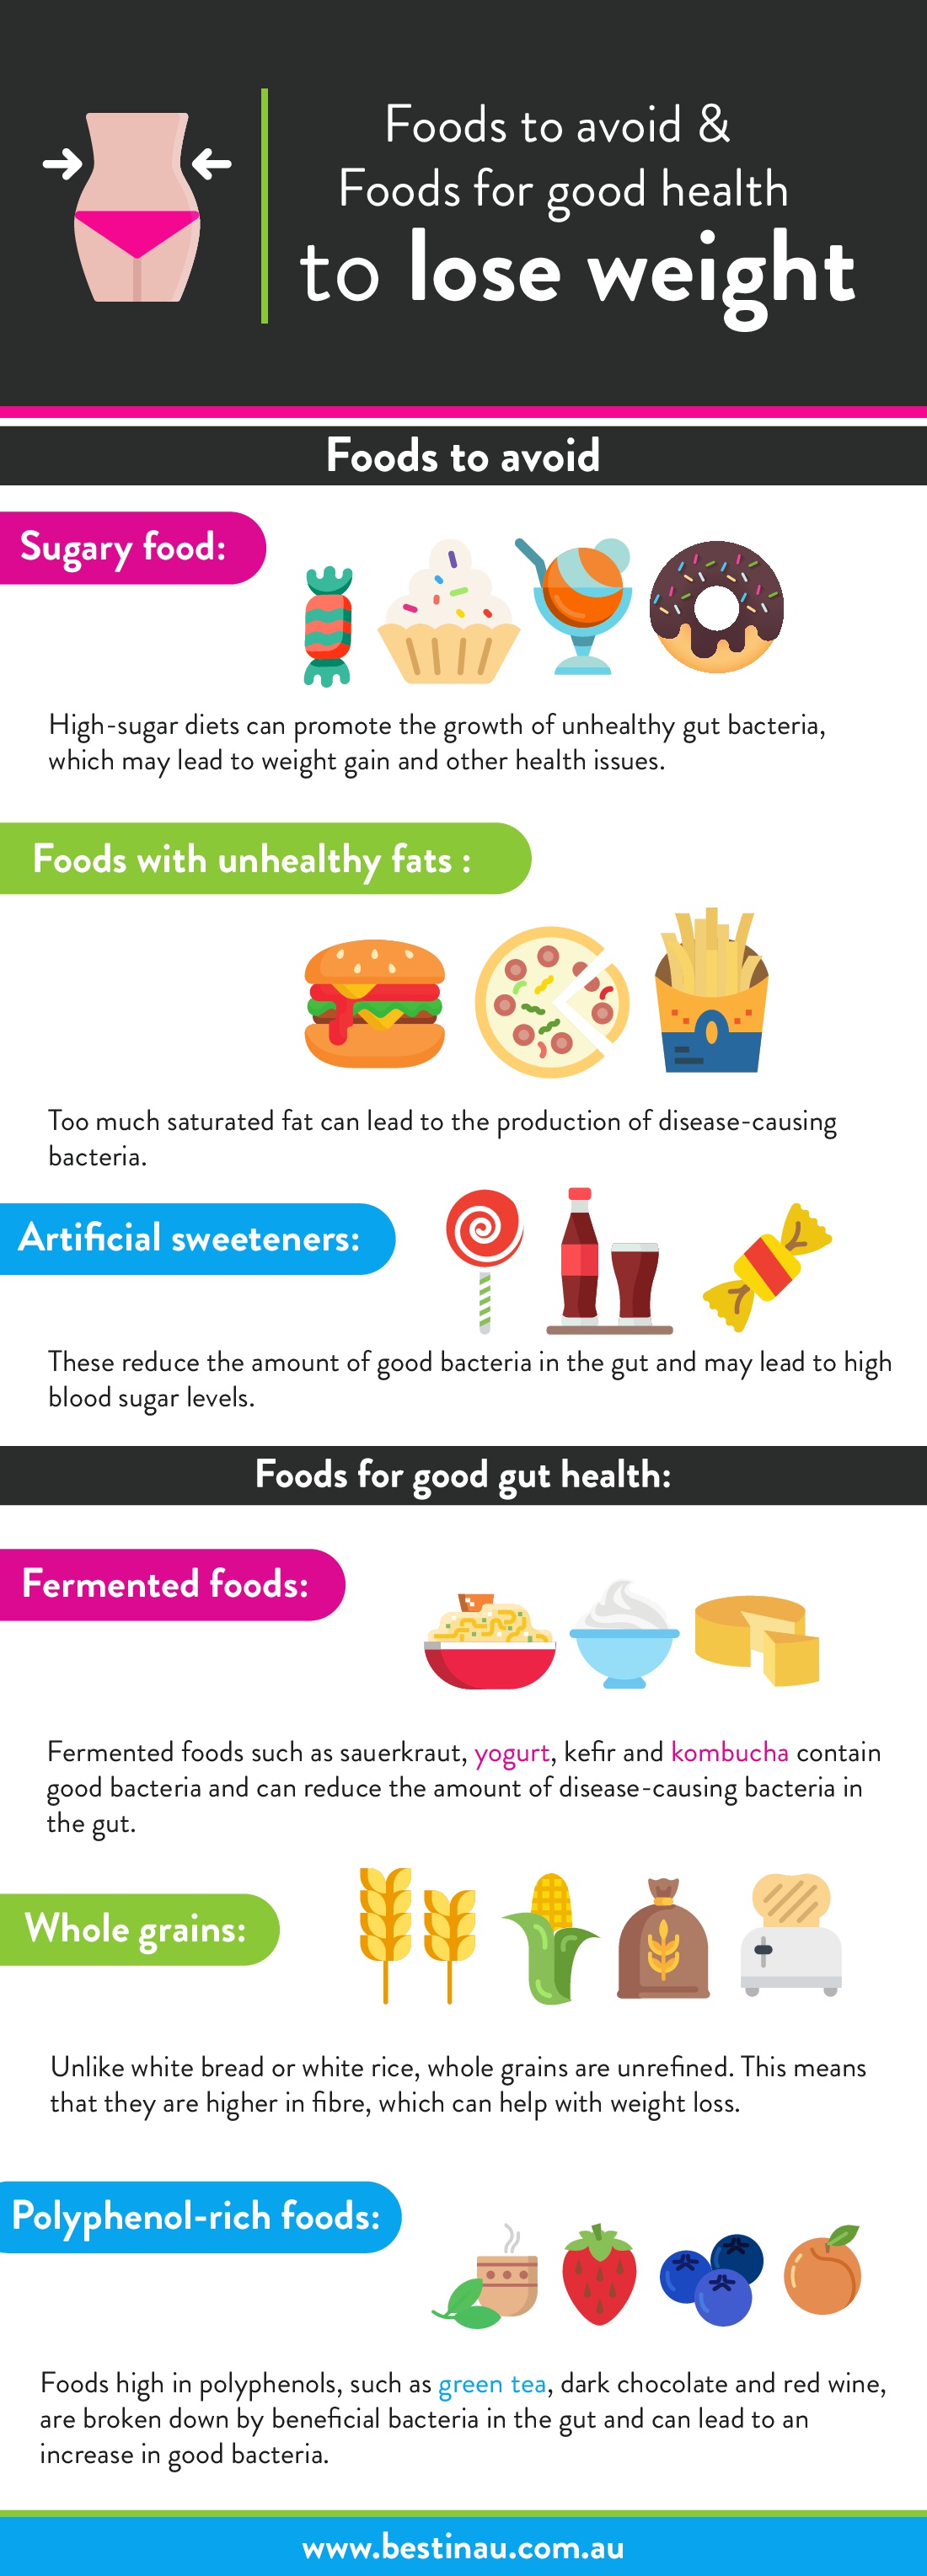 How to lose weight - infographic